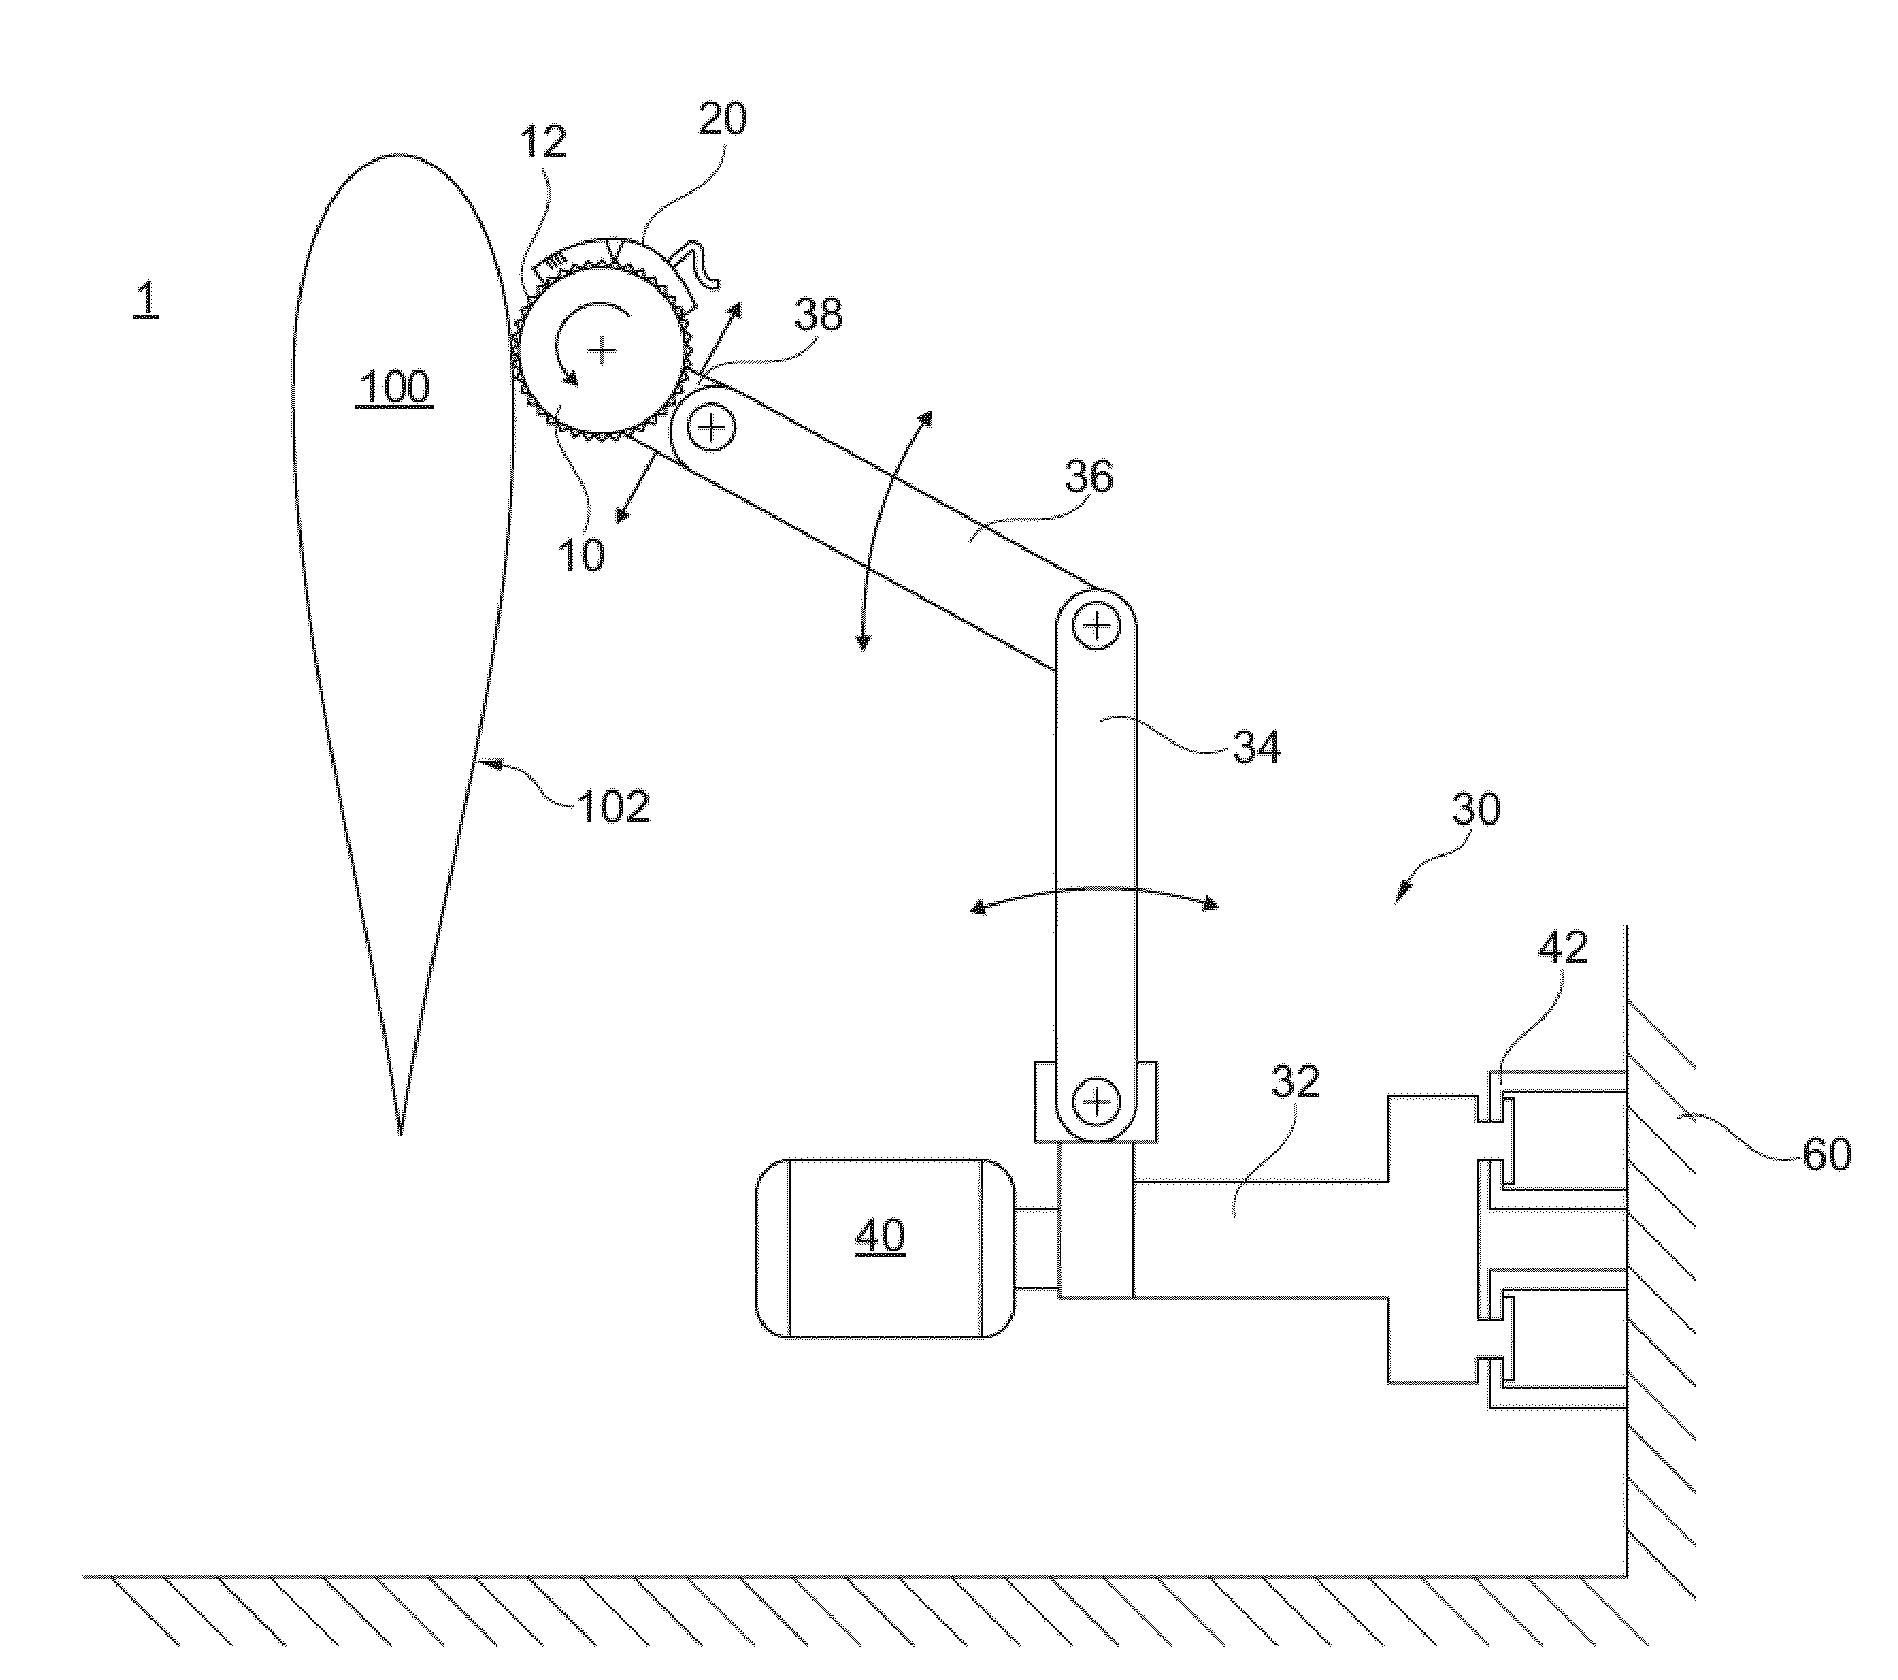 Grinding device for machine based grinding of rotor blades for wind energy systems